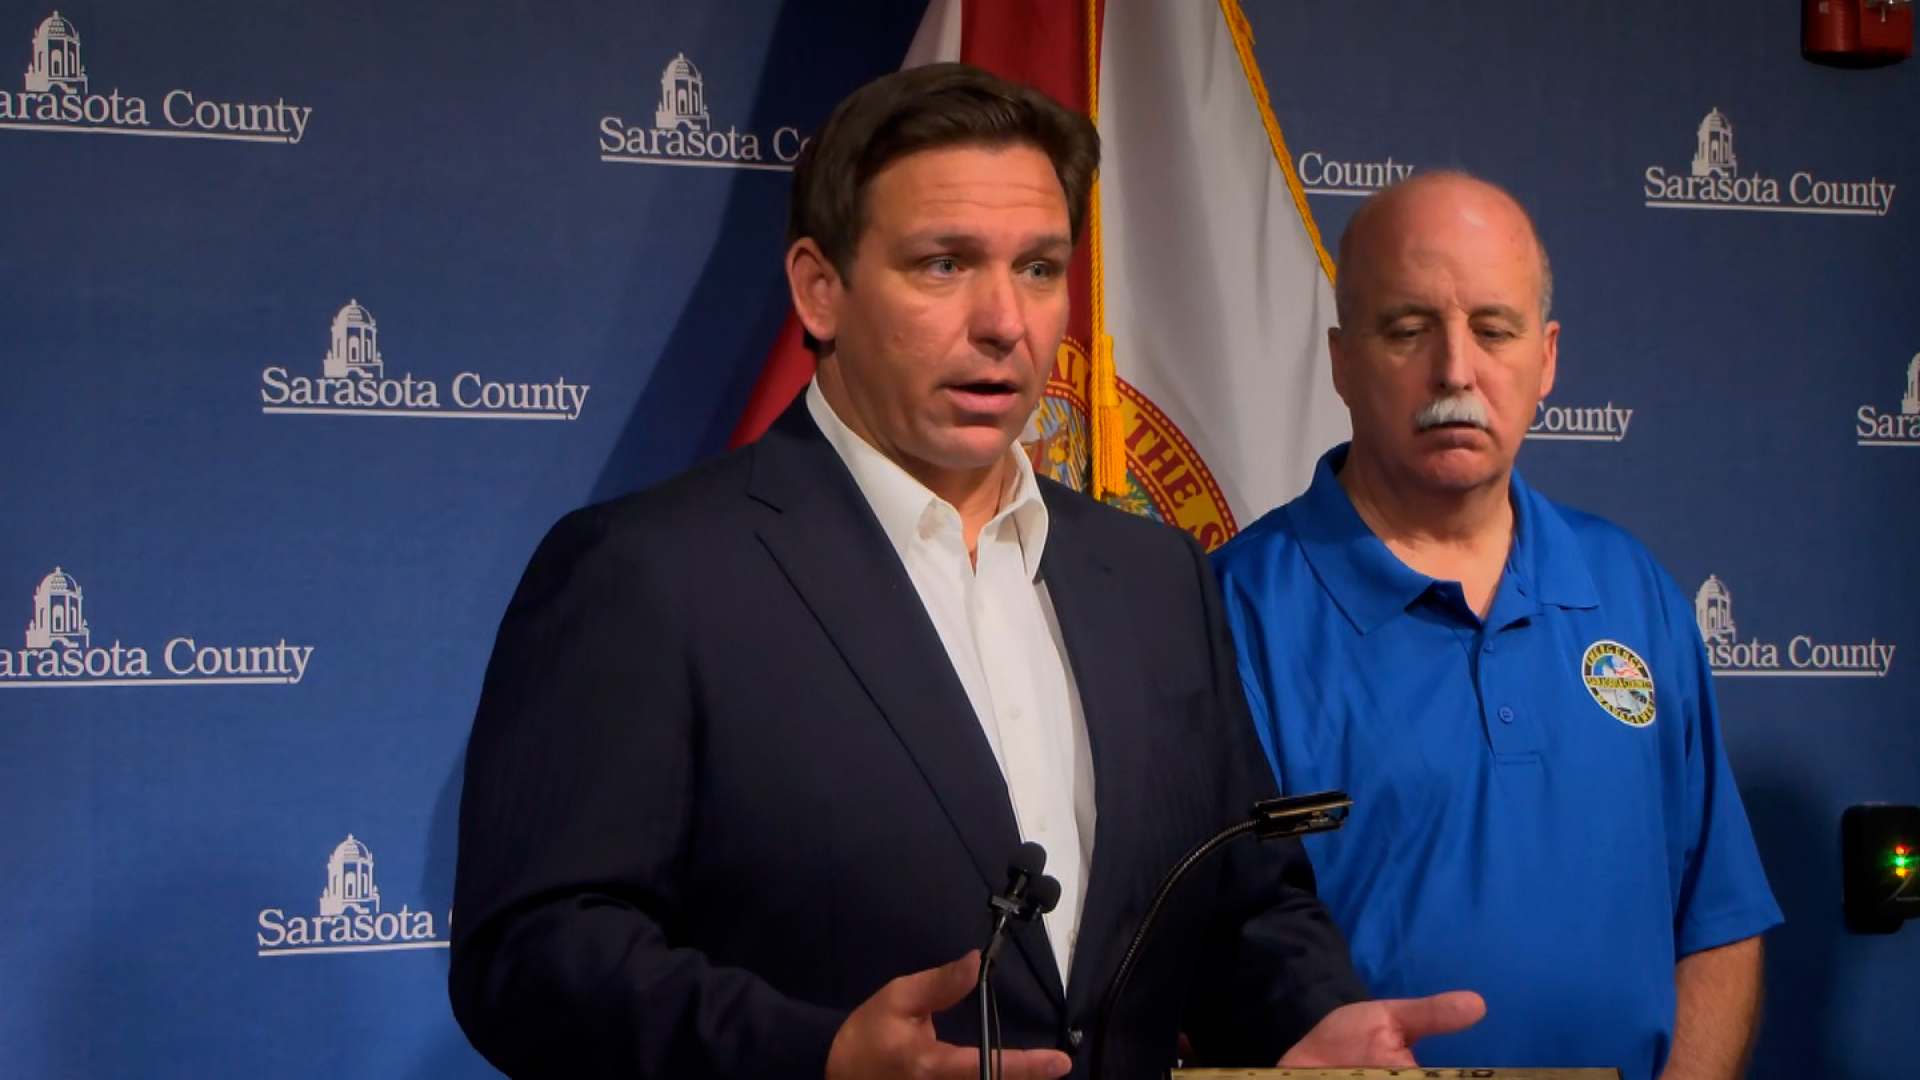 Florida governor warns of catastrophic flooding and life-threatening storm surge